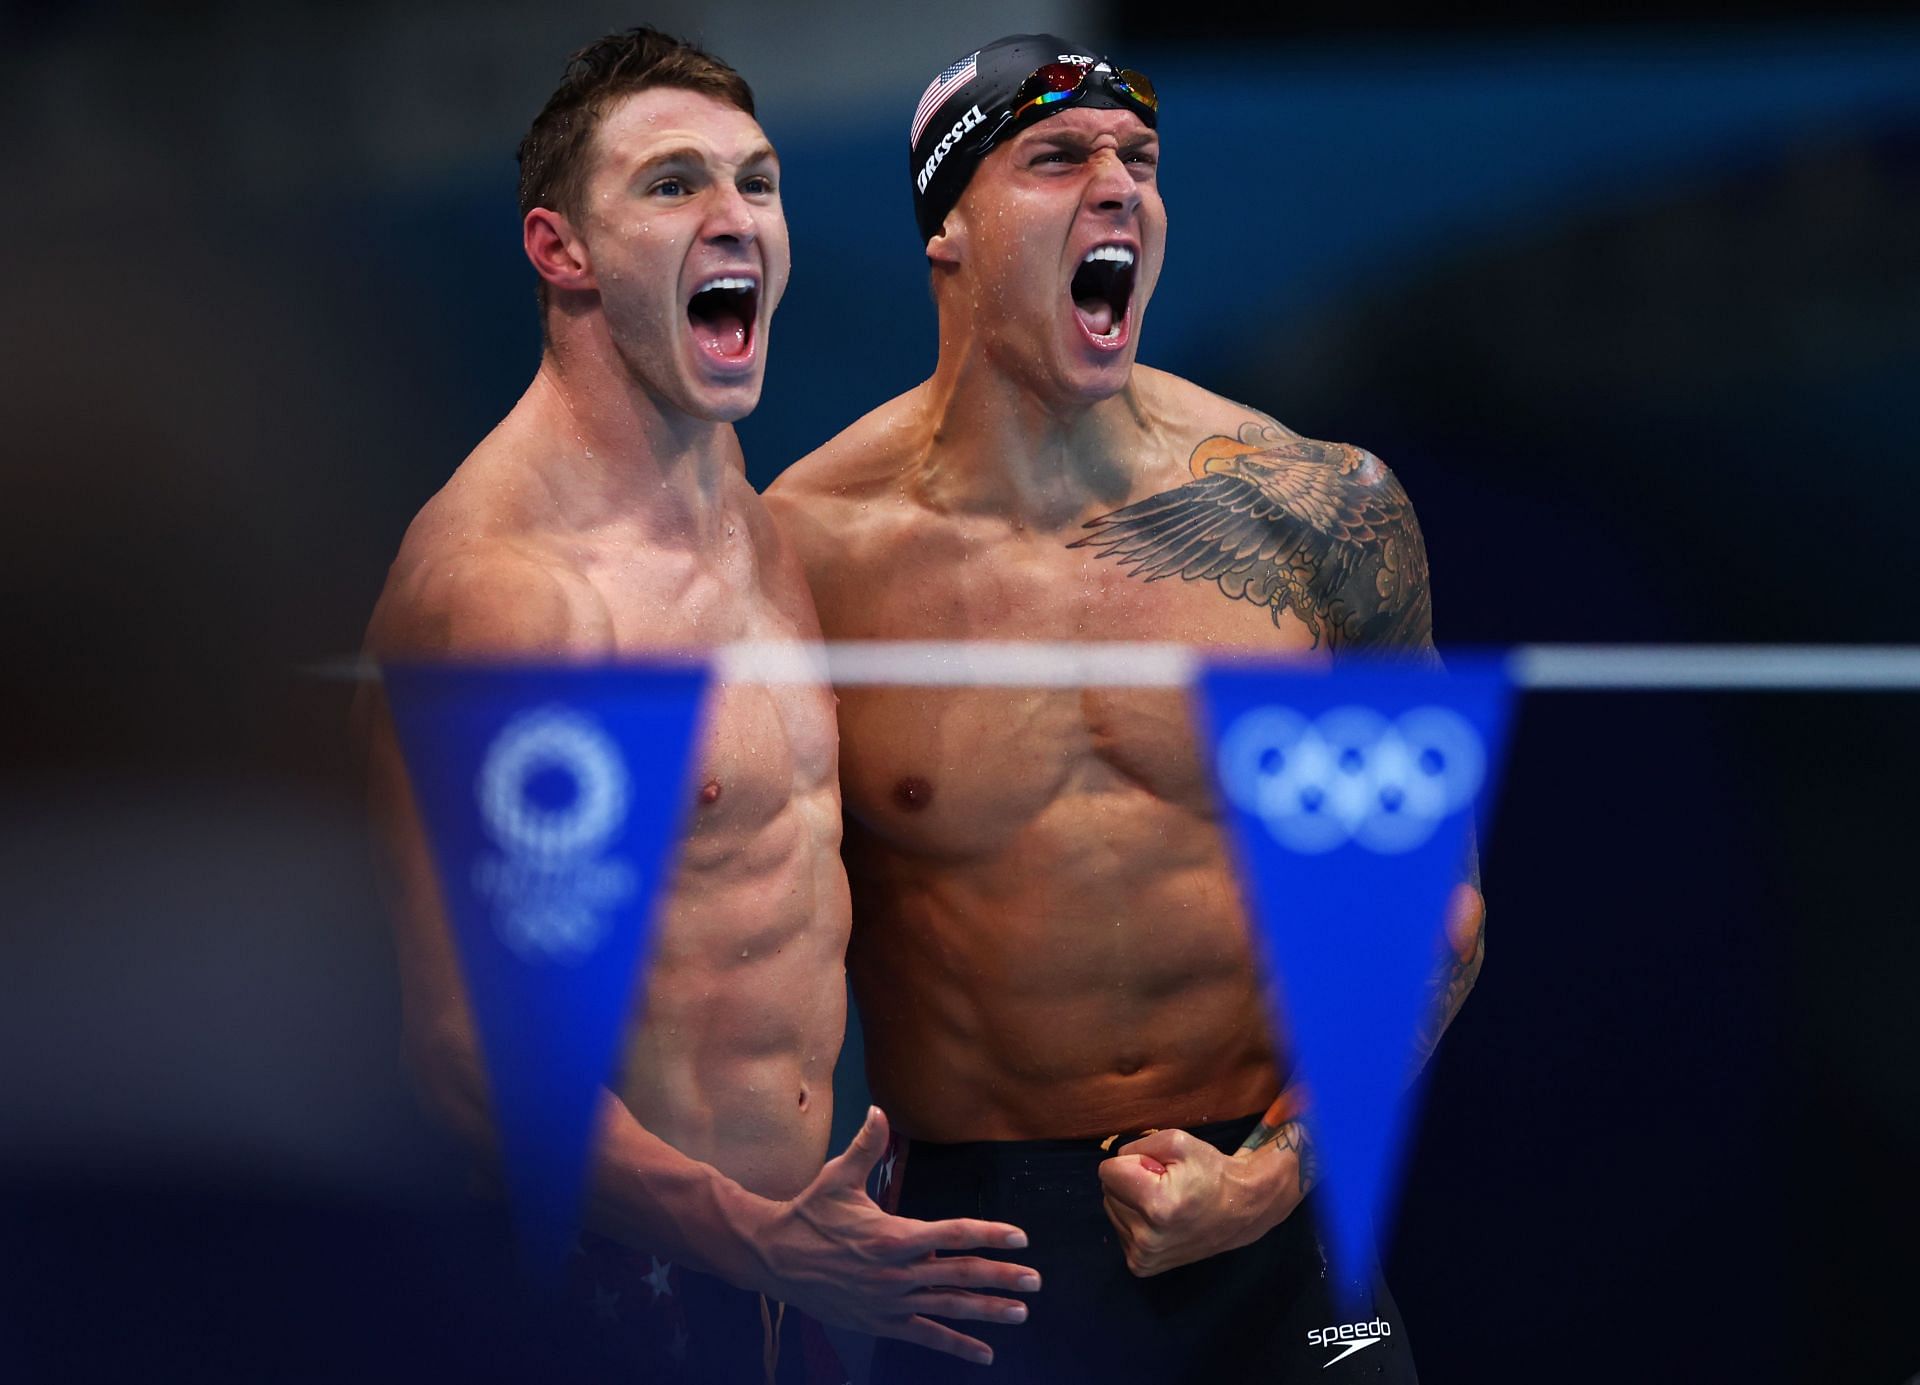 Ryan Murphy (L) and Caeleb Dressel (R) of Team United States react after winning the gold medal (Photo by Maddie Meyer/Getty Images)